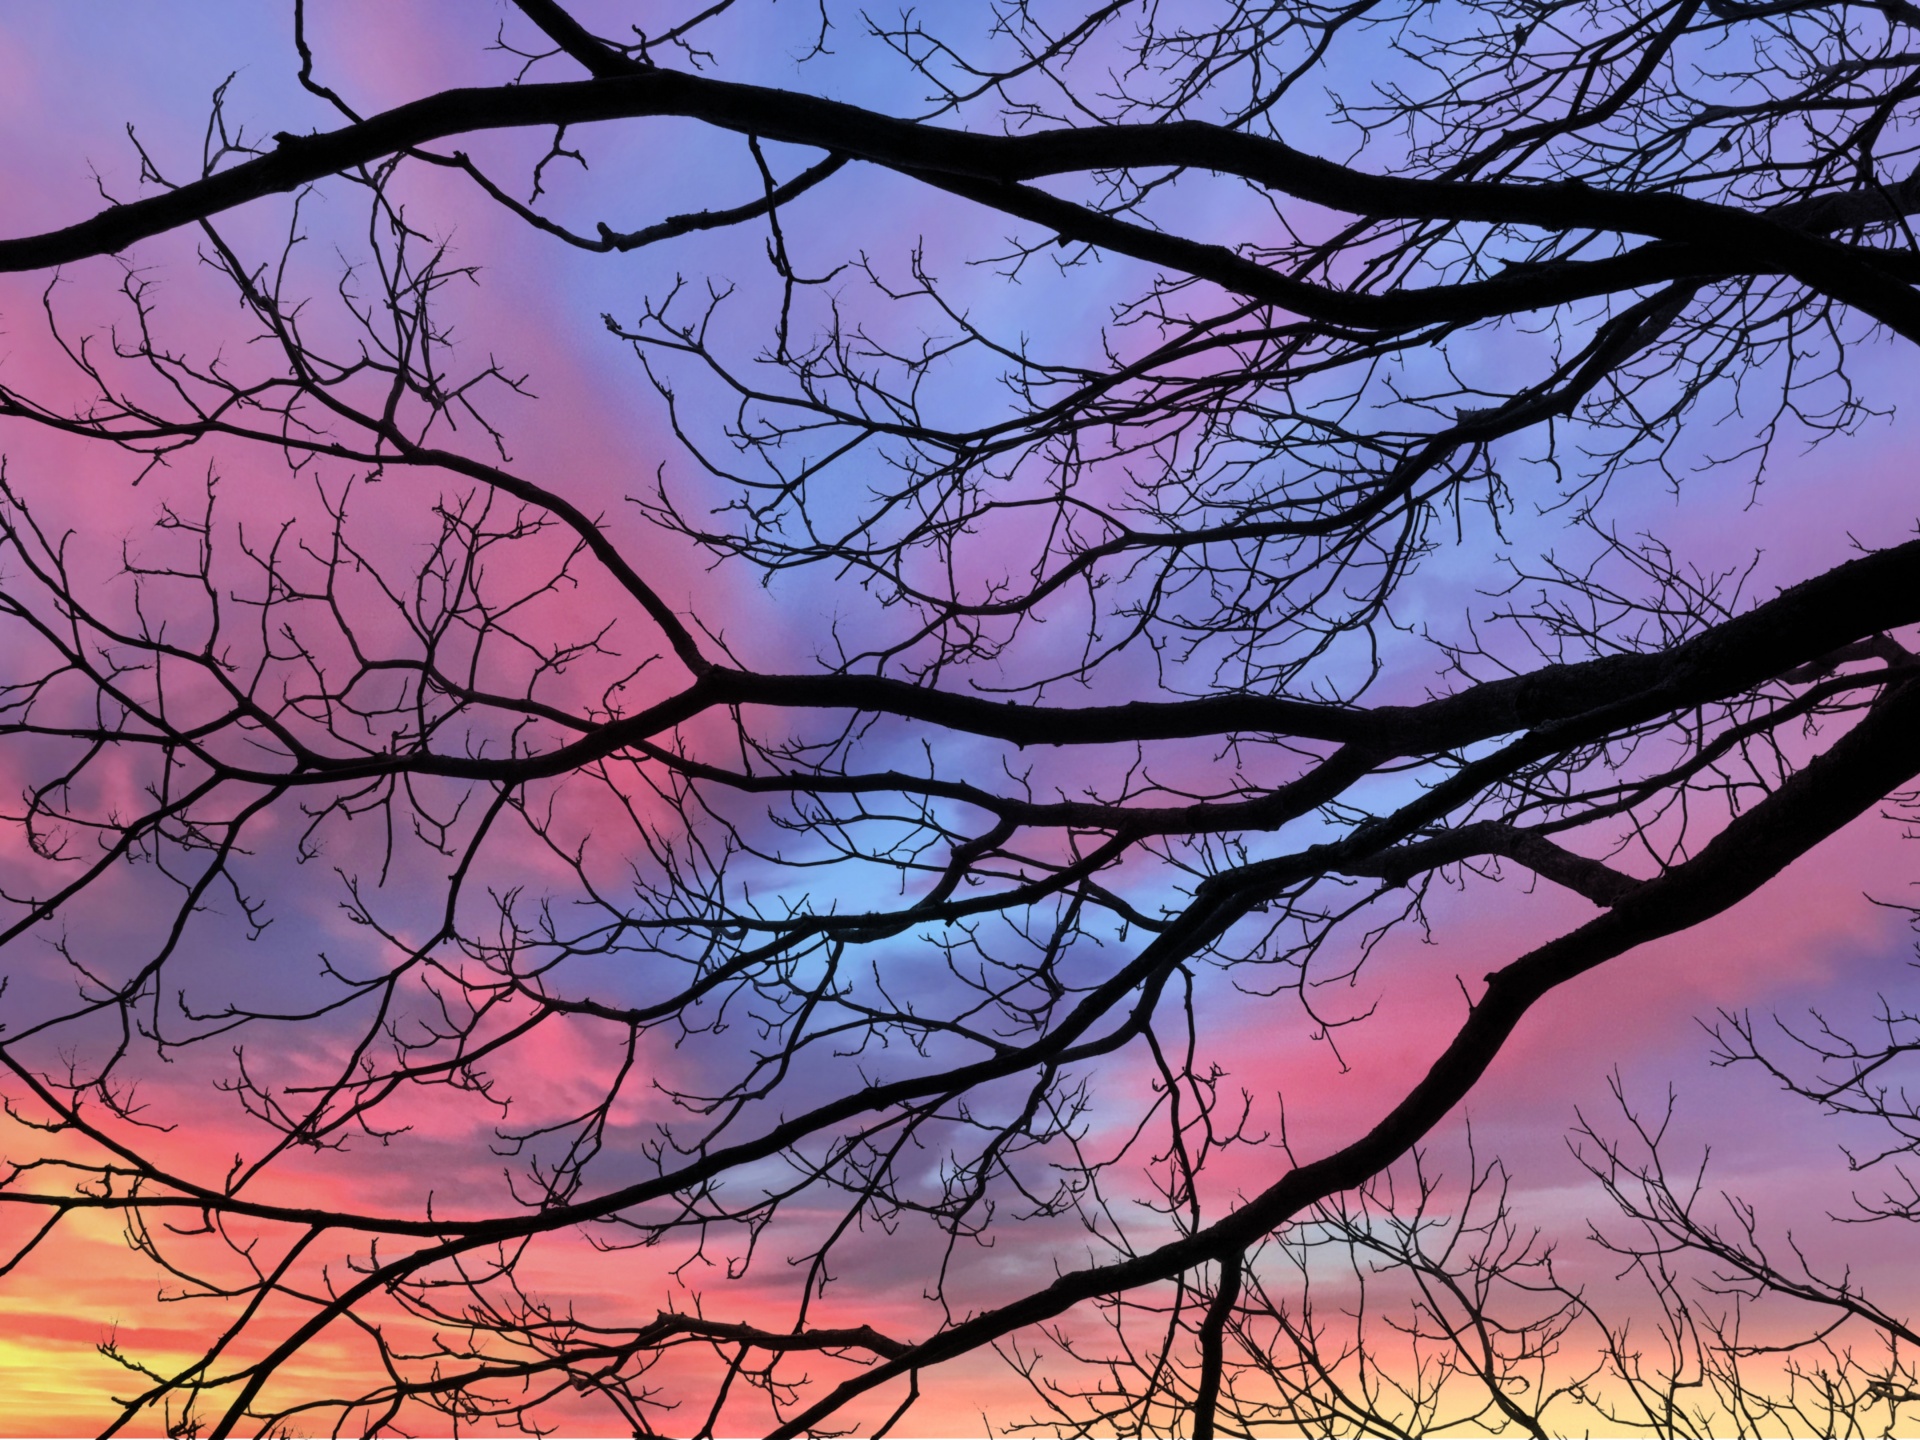 Branches tree twigs sky clouds sunset nature photography